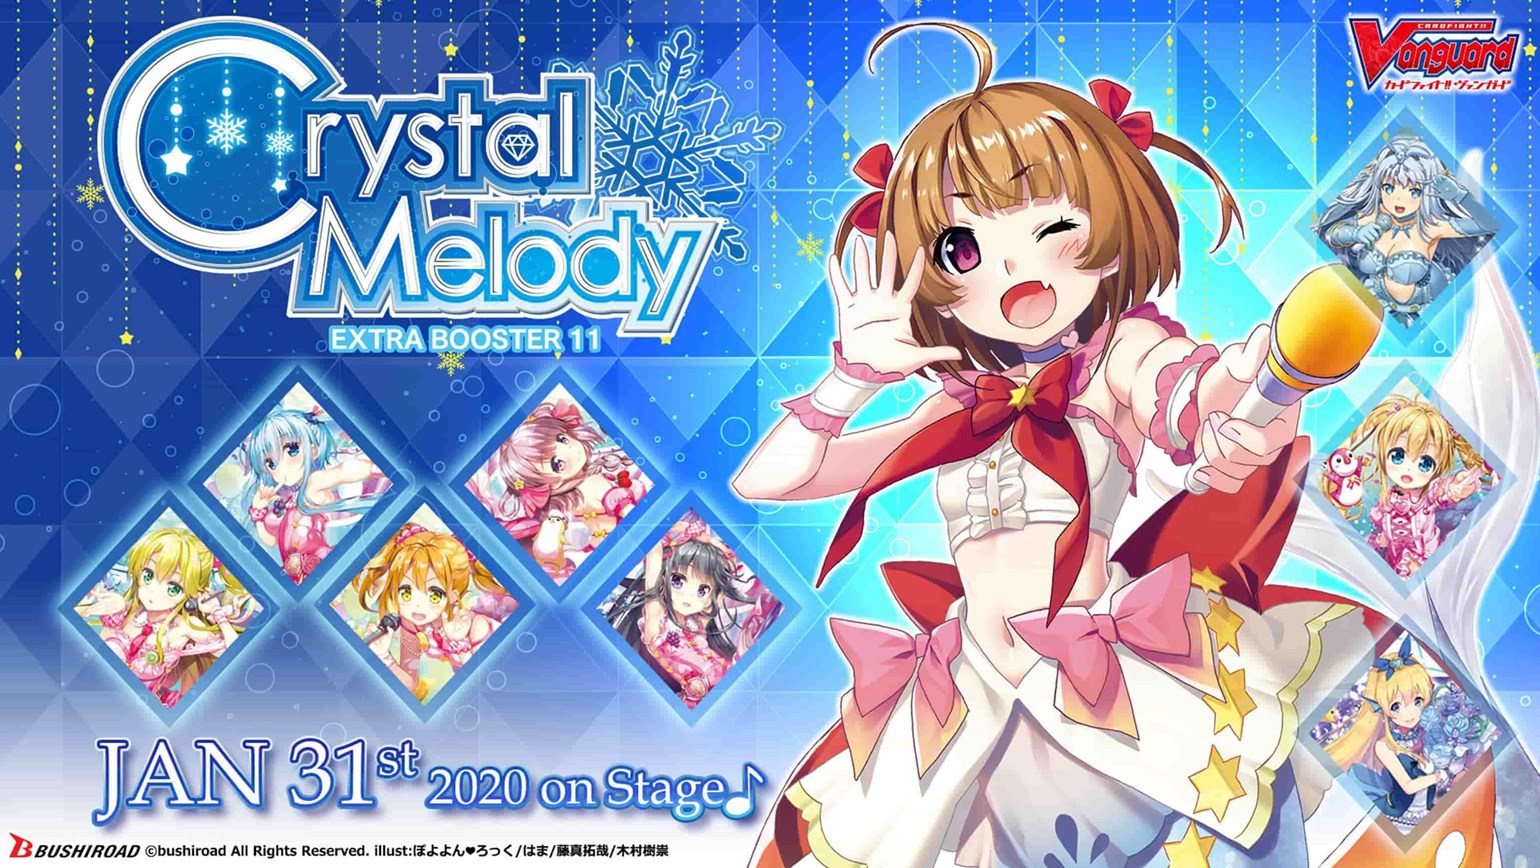 English Edition Cardfight!! Vanguard Extra Booster 11: Crystal Melody Coming January 31st